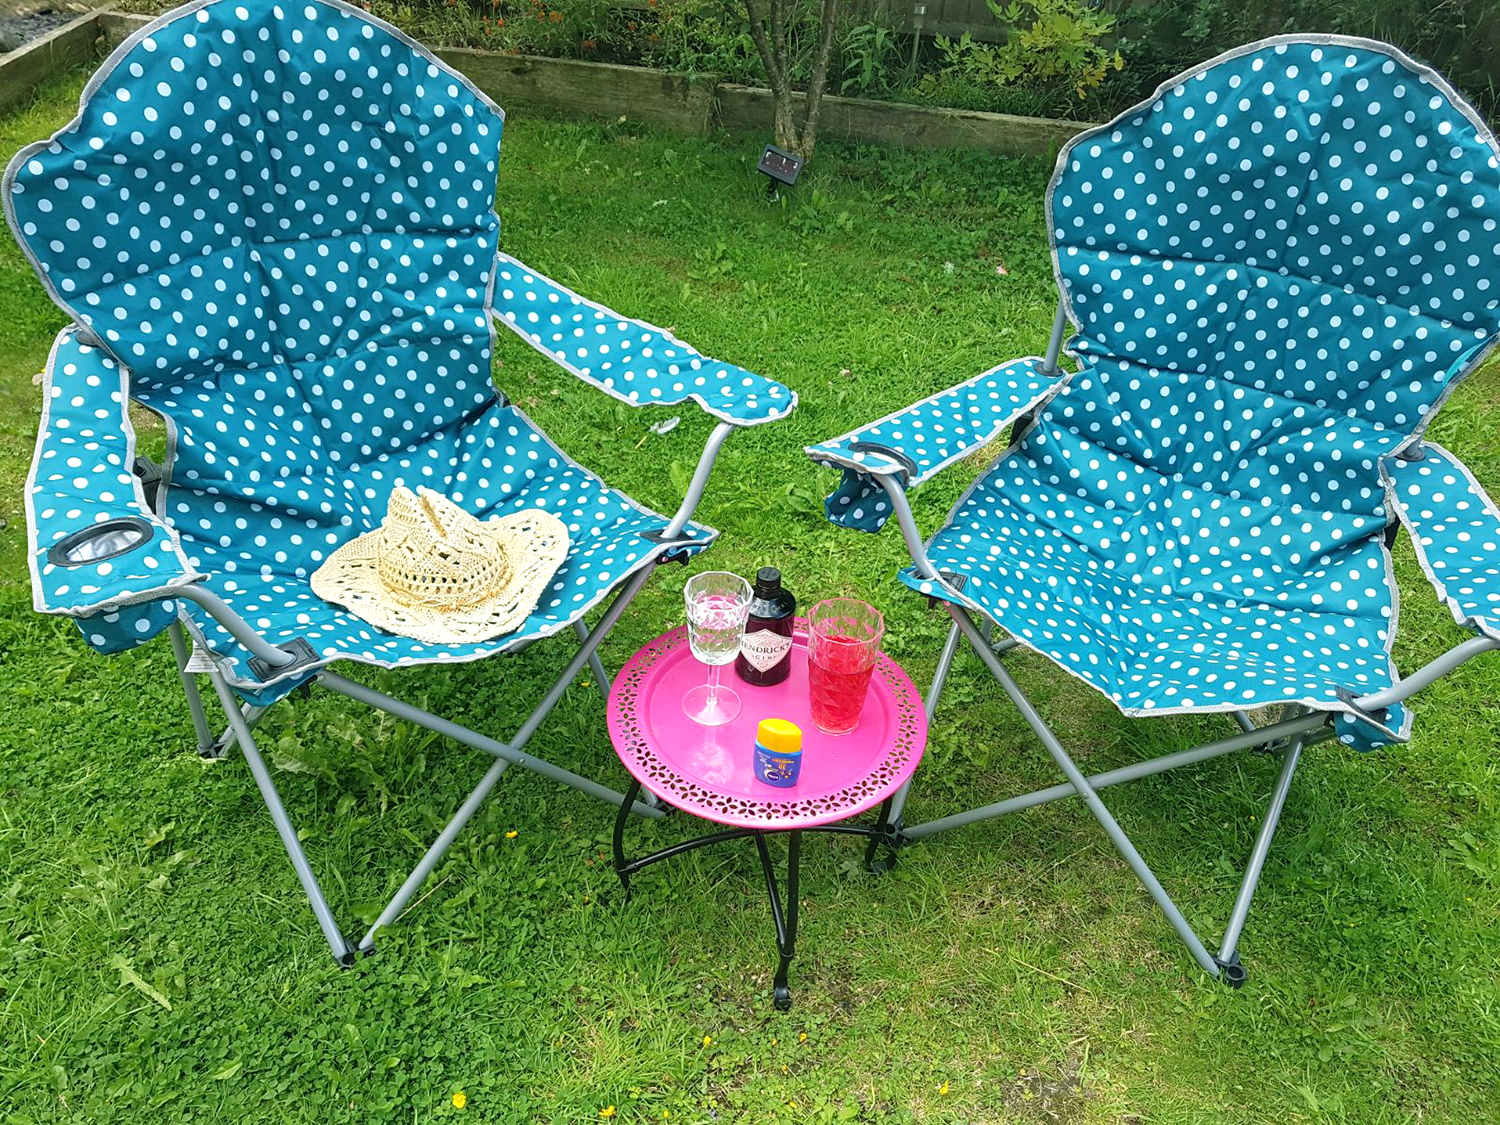 Deluxe polka dot camping chair